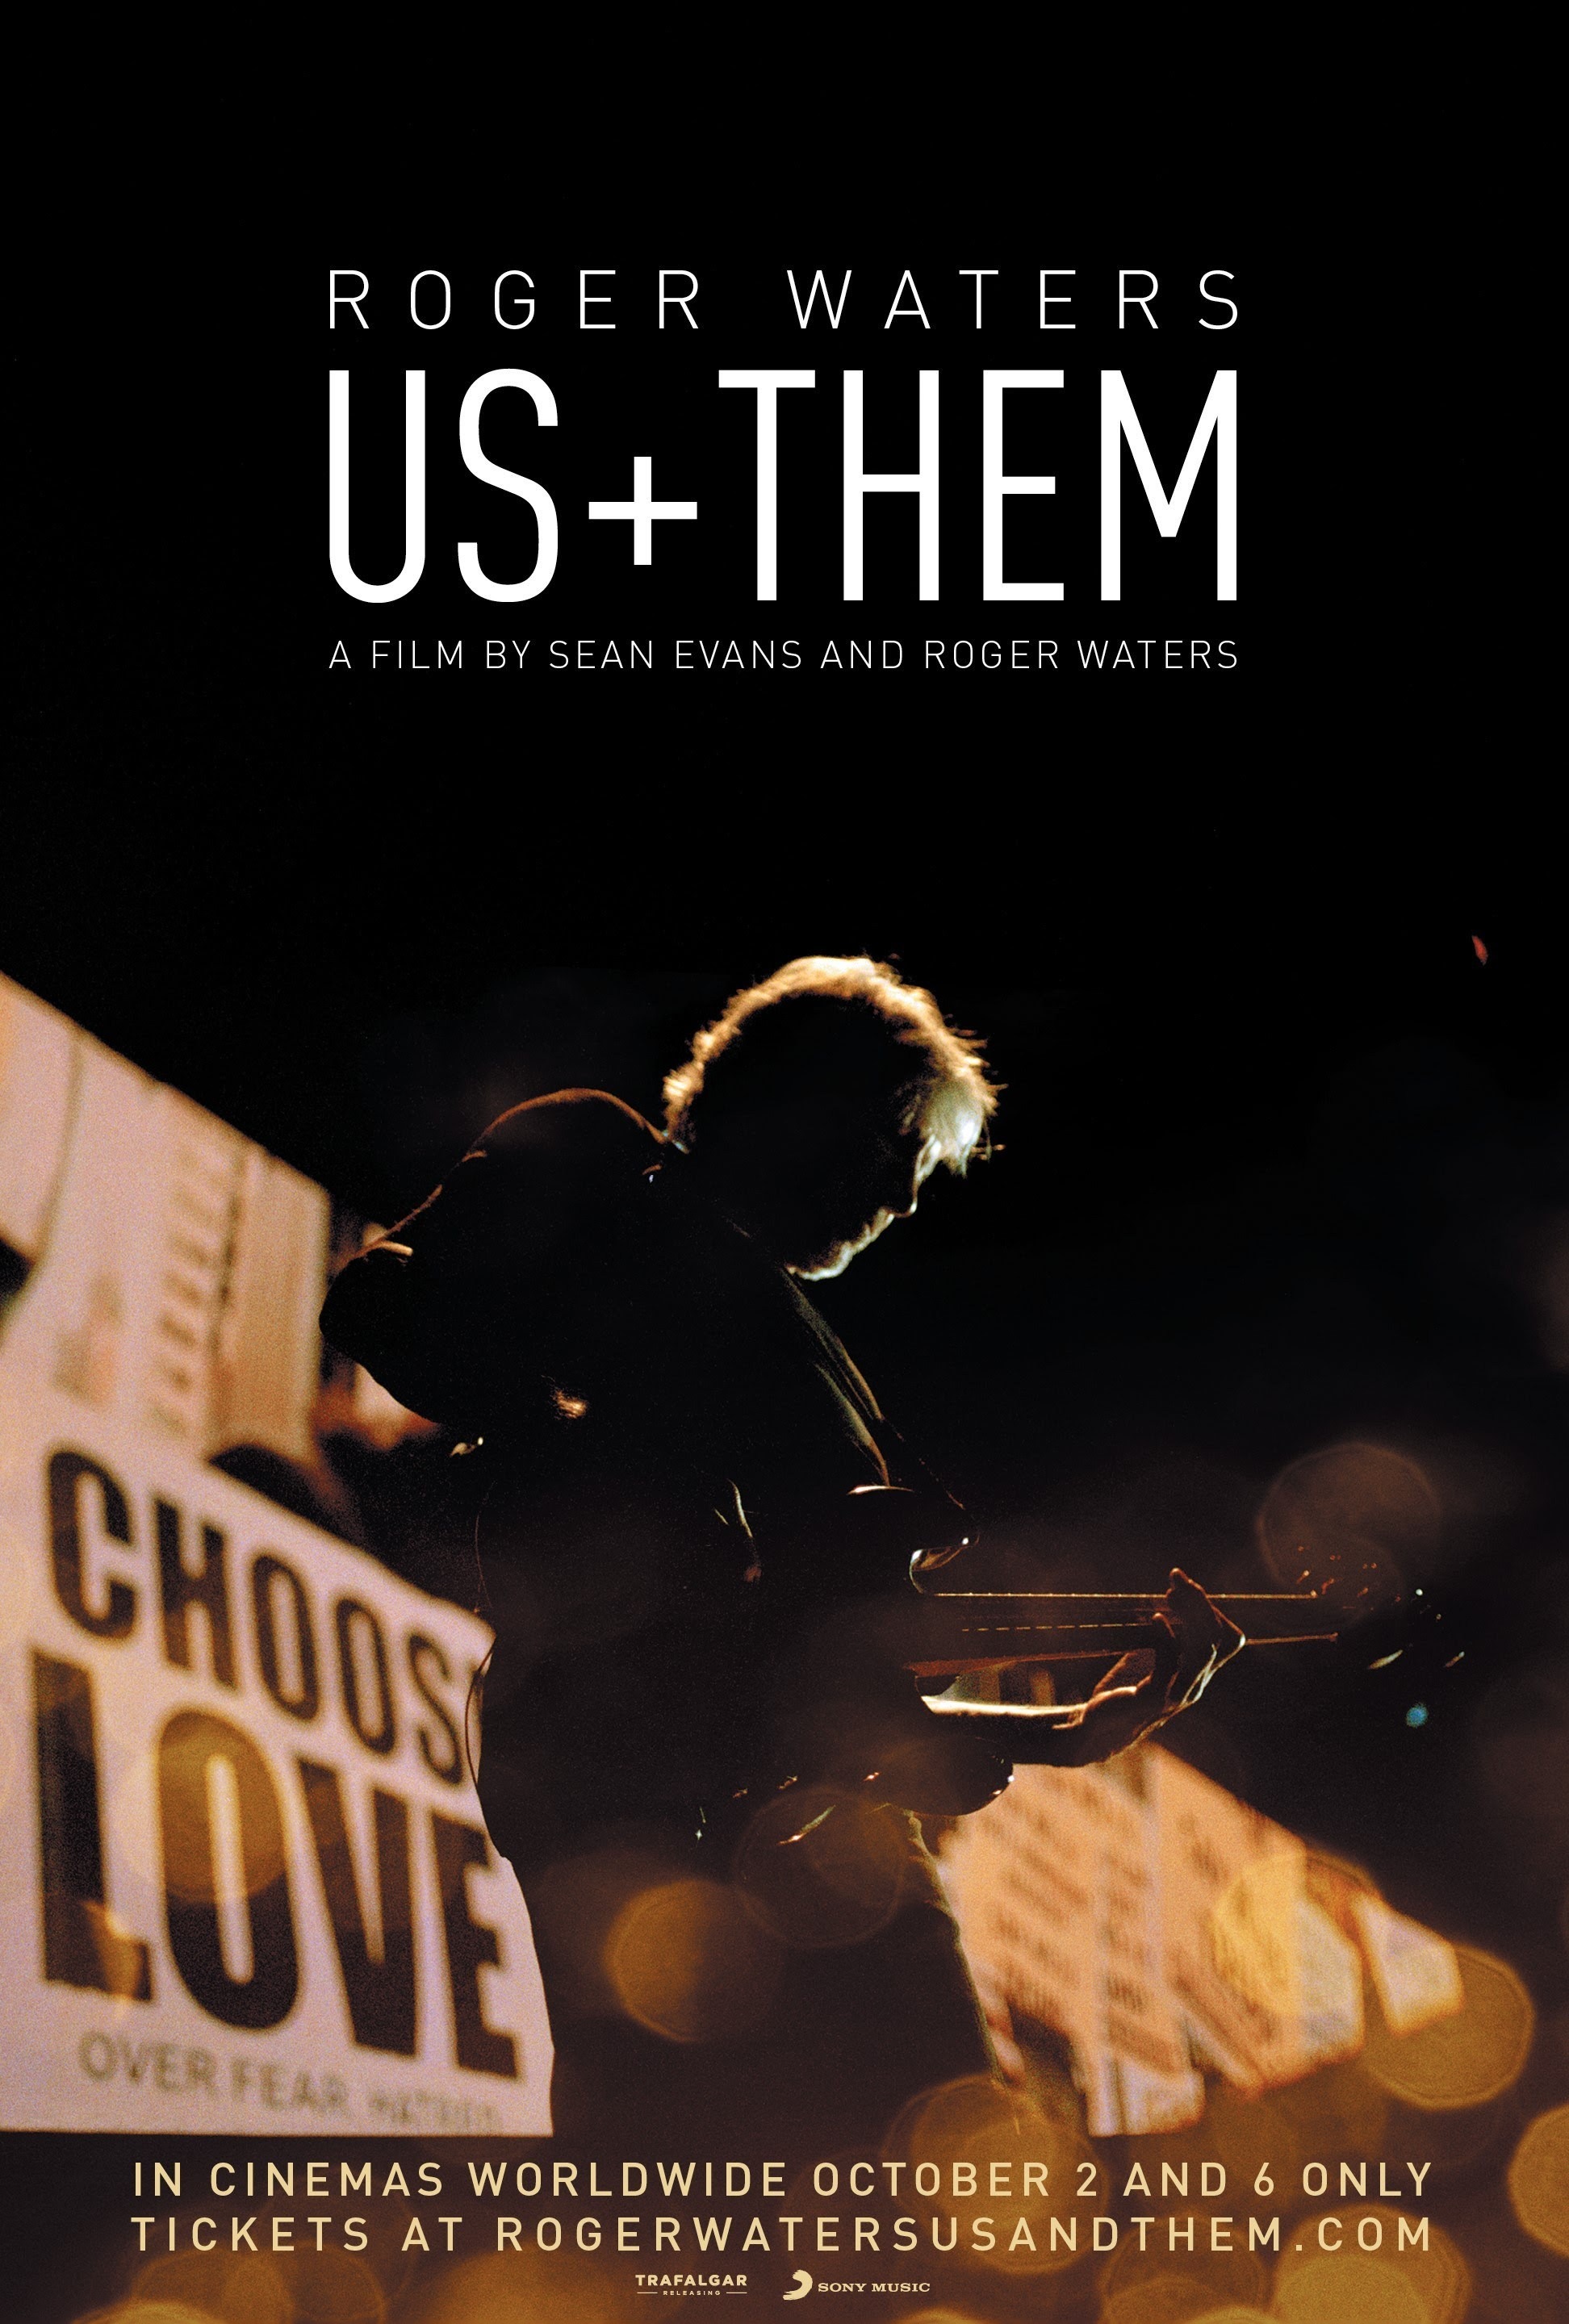 Mega Sized Movie Poster Image for Roger Waters: Us + Them 